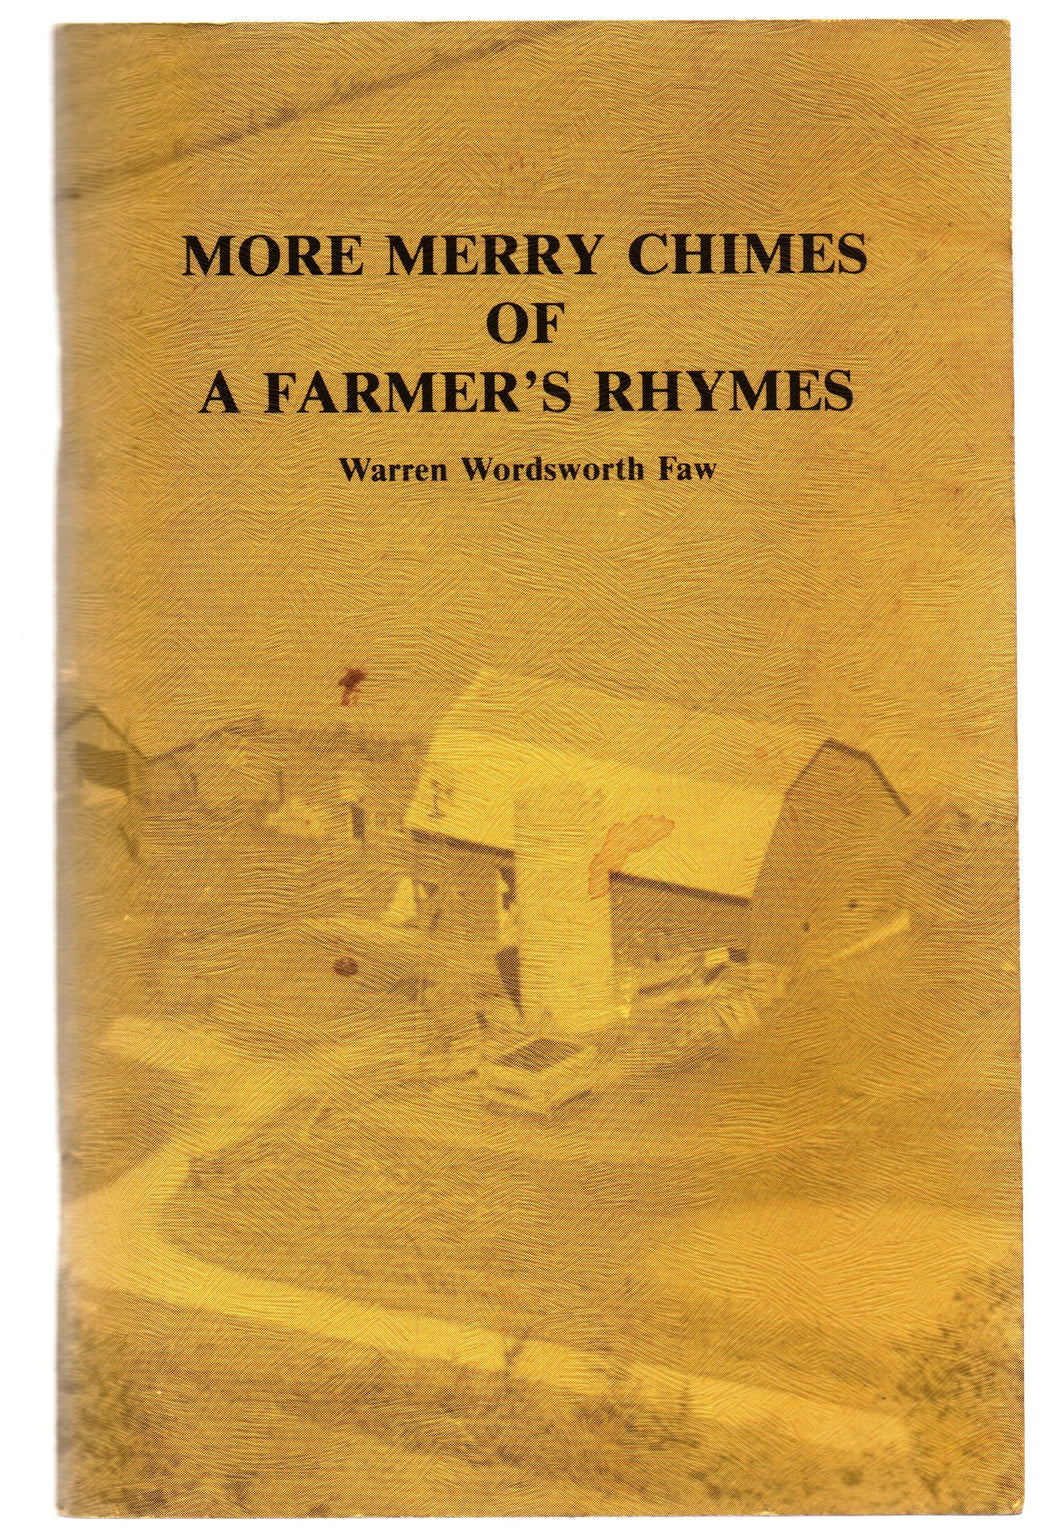 More Merry Chimes of a Farmer's Rhymes